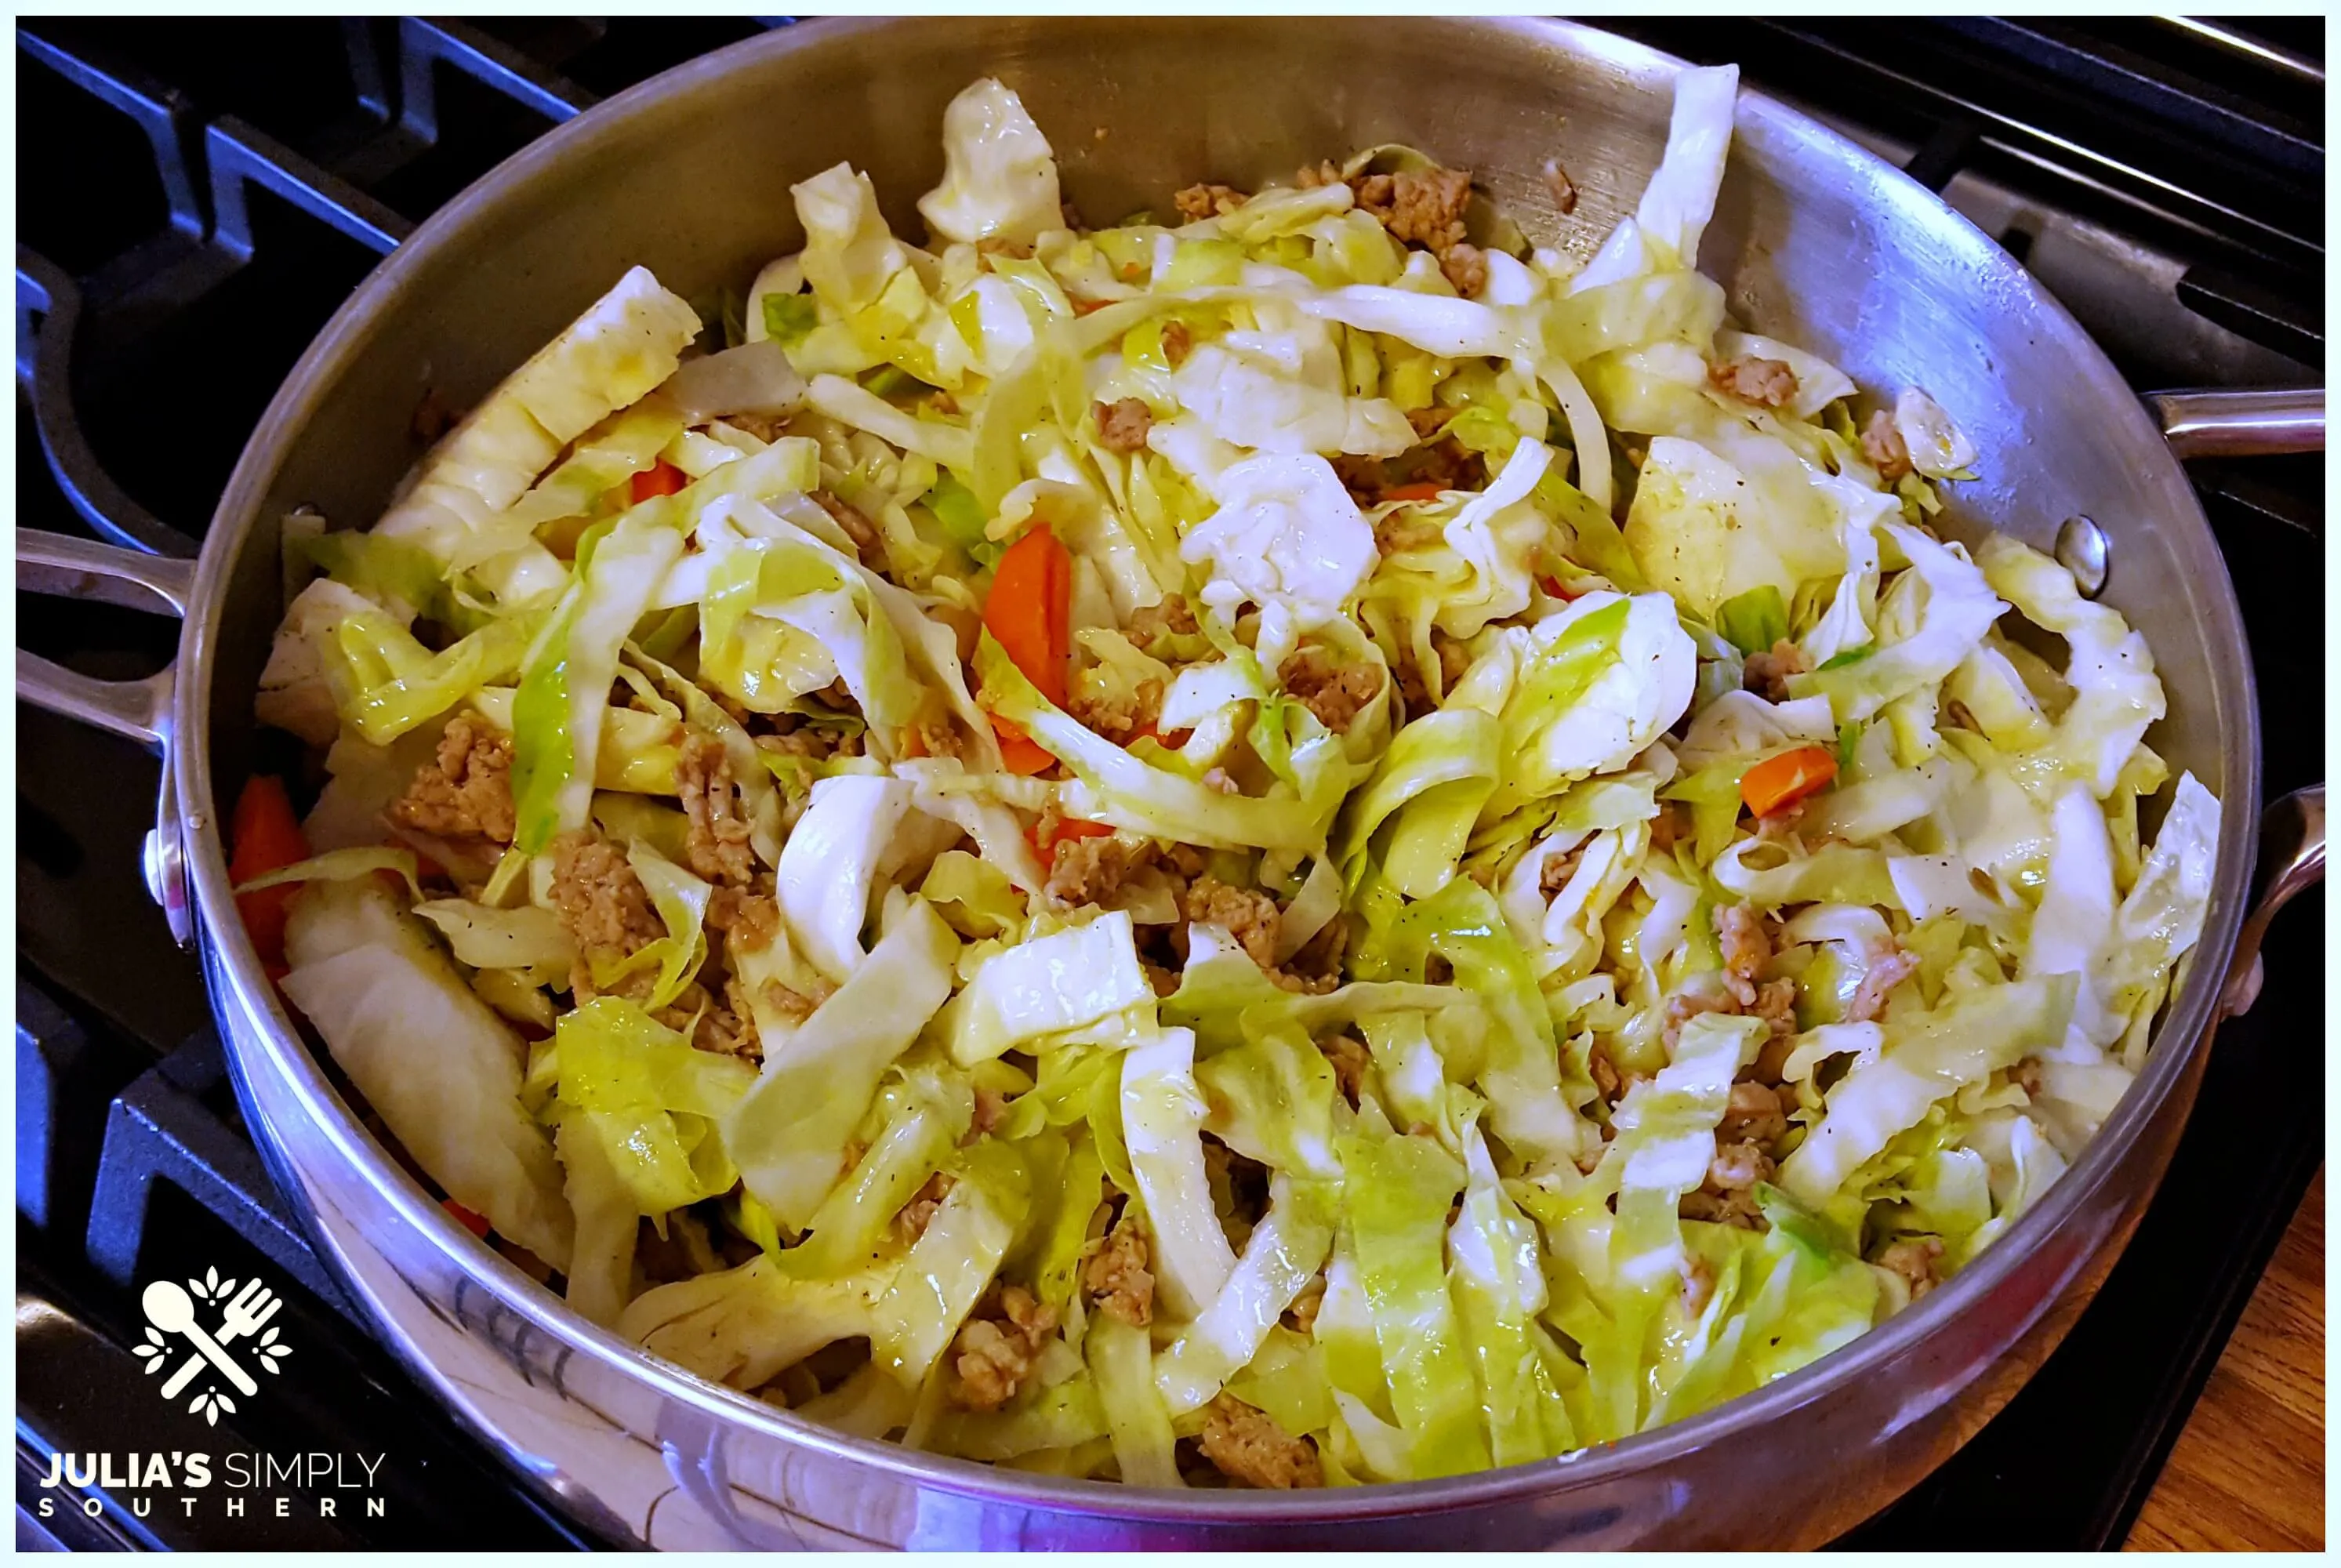 Stir Fry - Egg roll in a bowl - pork, cabbage and carrots in a silver skillet